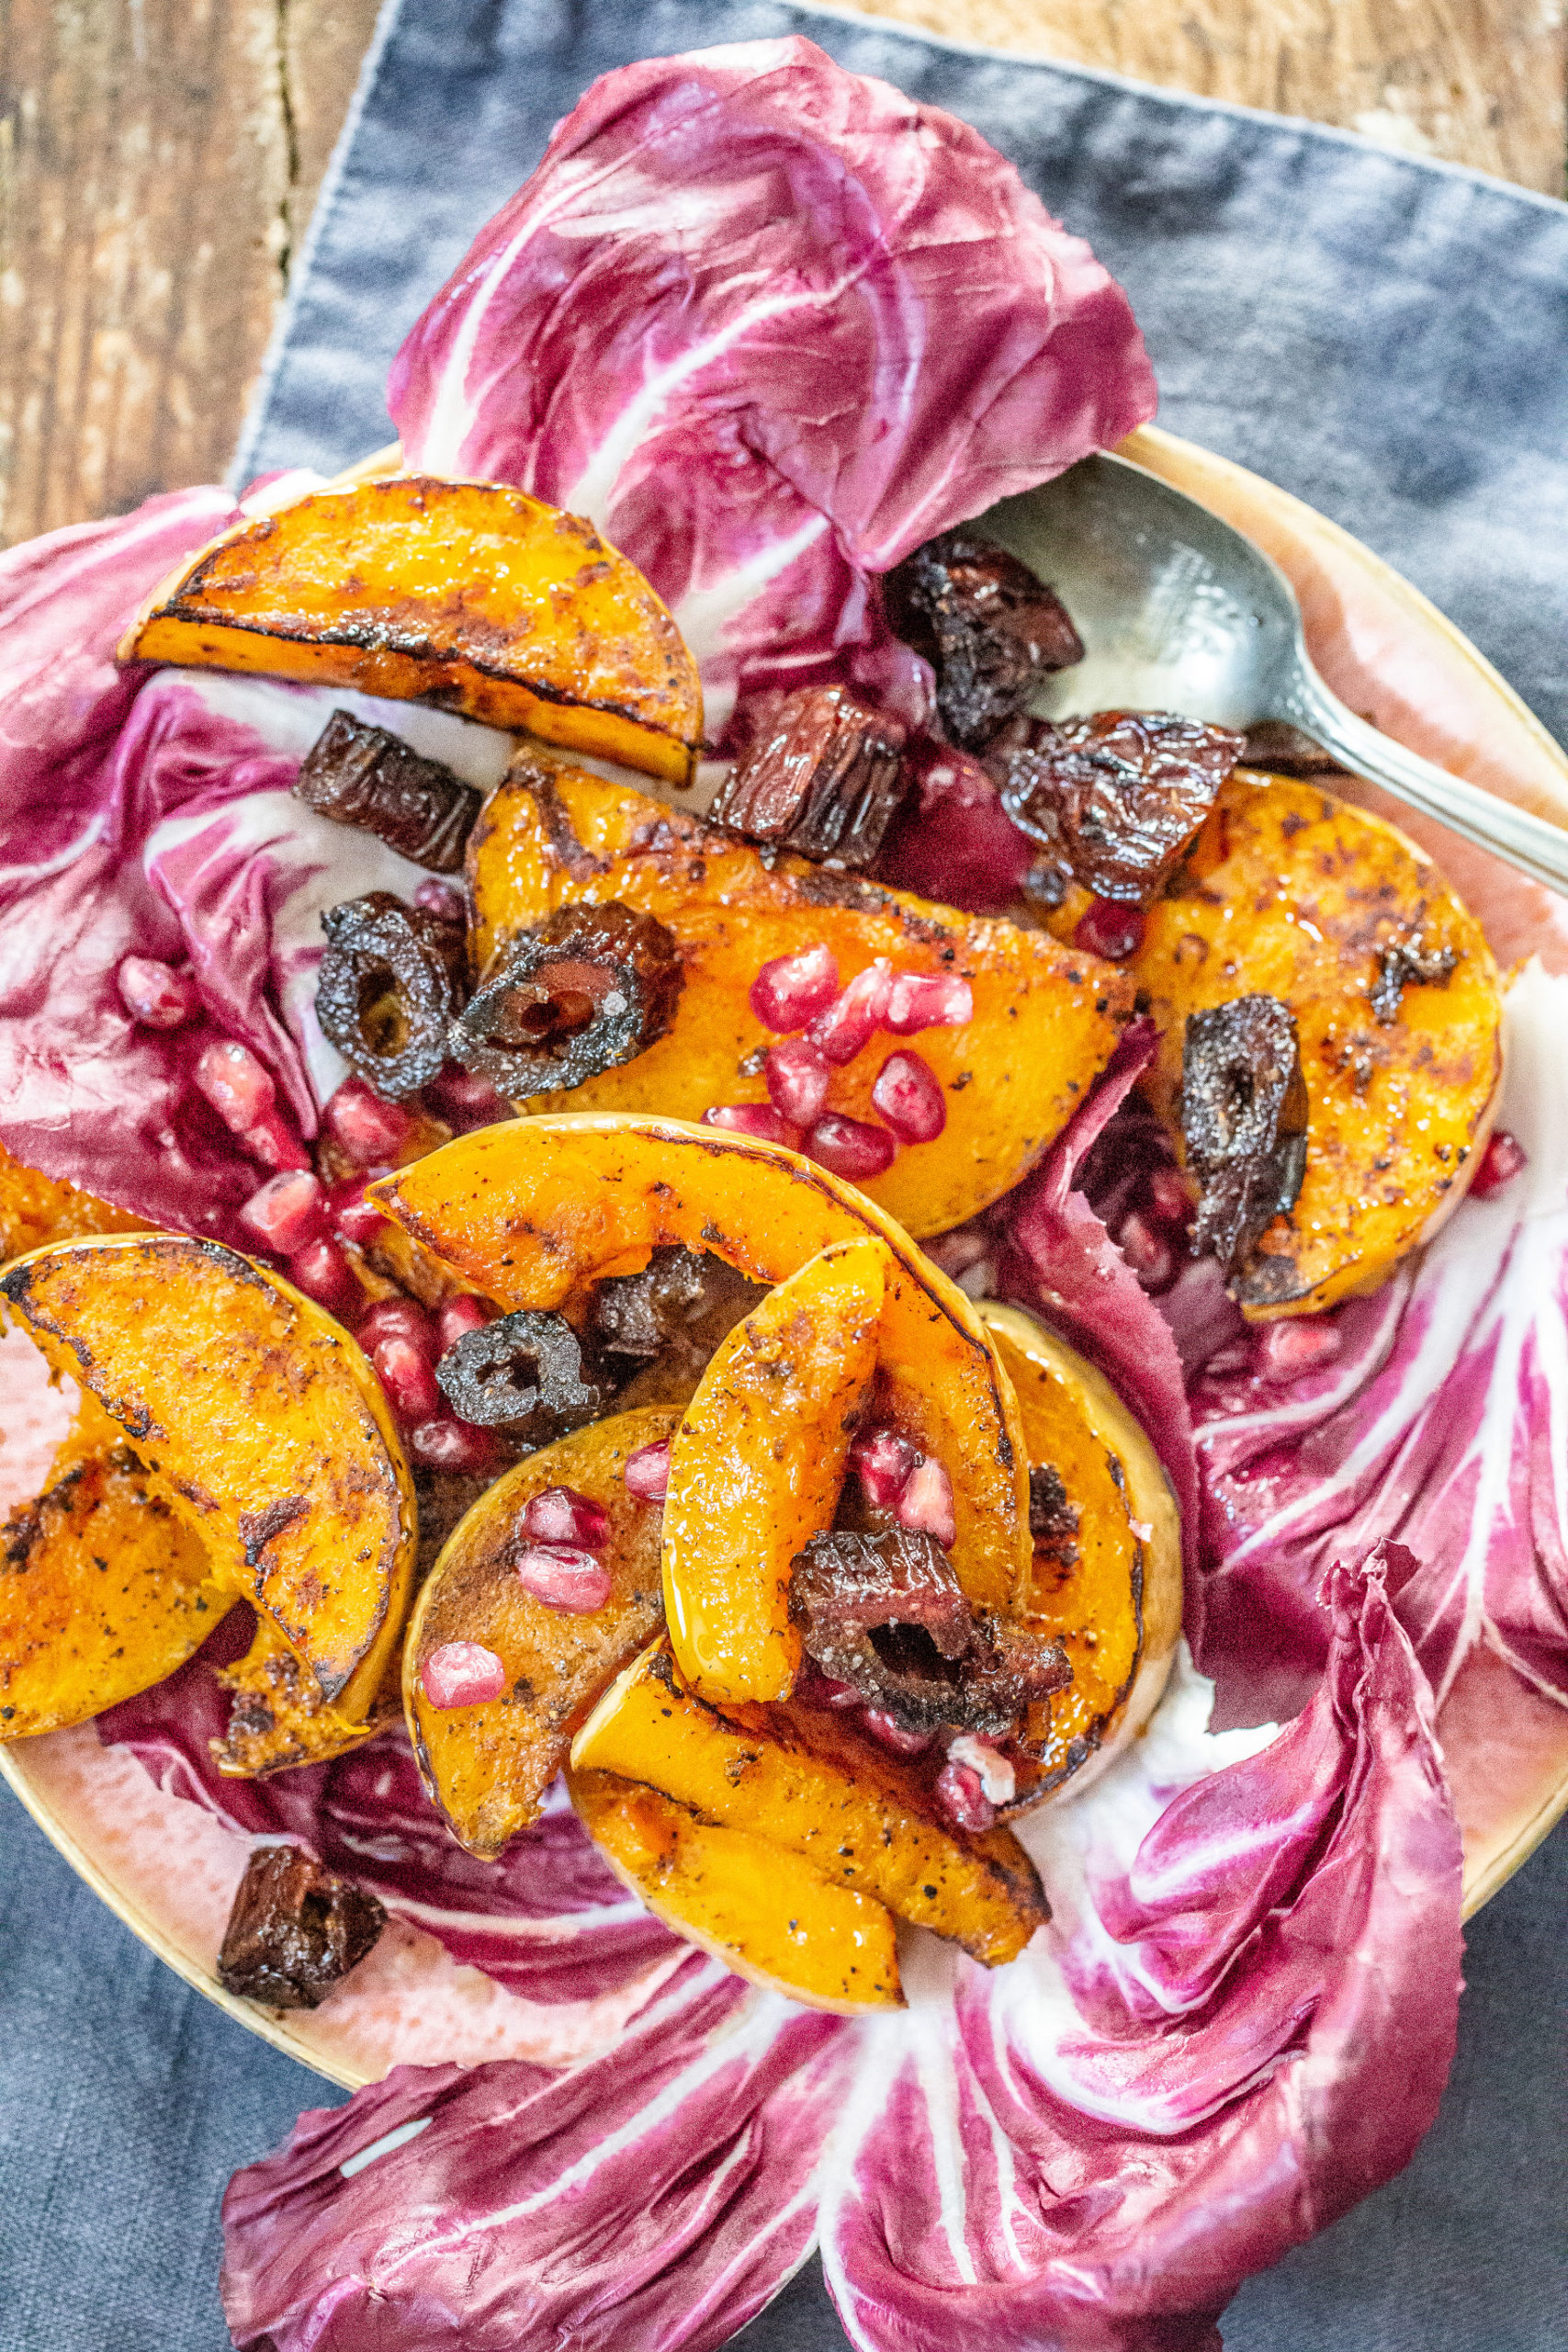 Warm Squash and Radicchio Salad with Balsamic Brown Butter